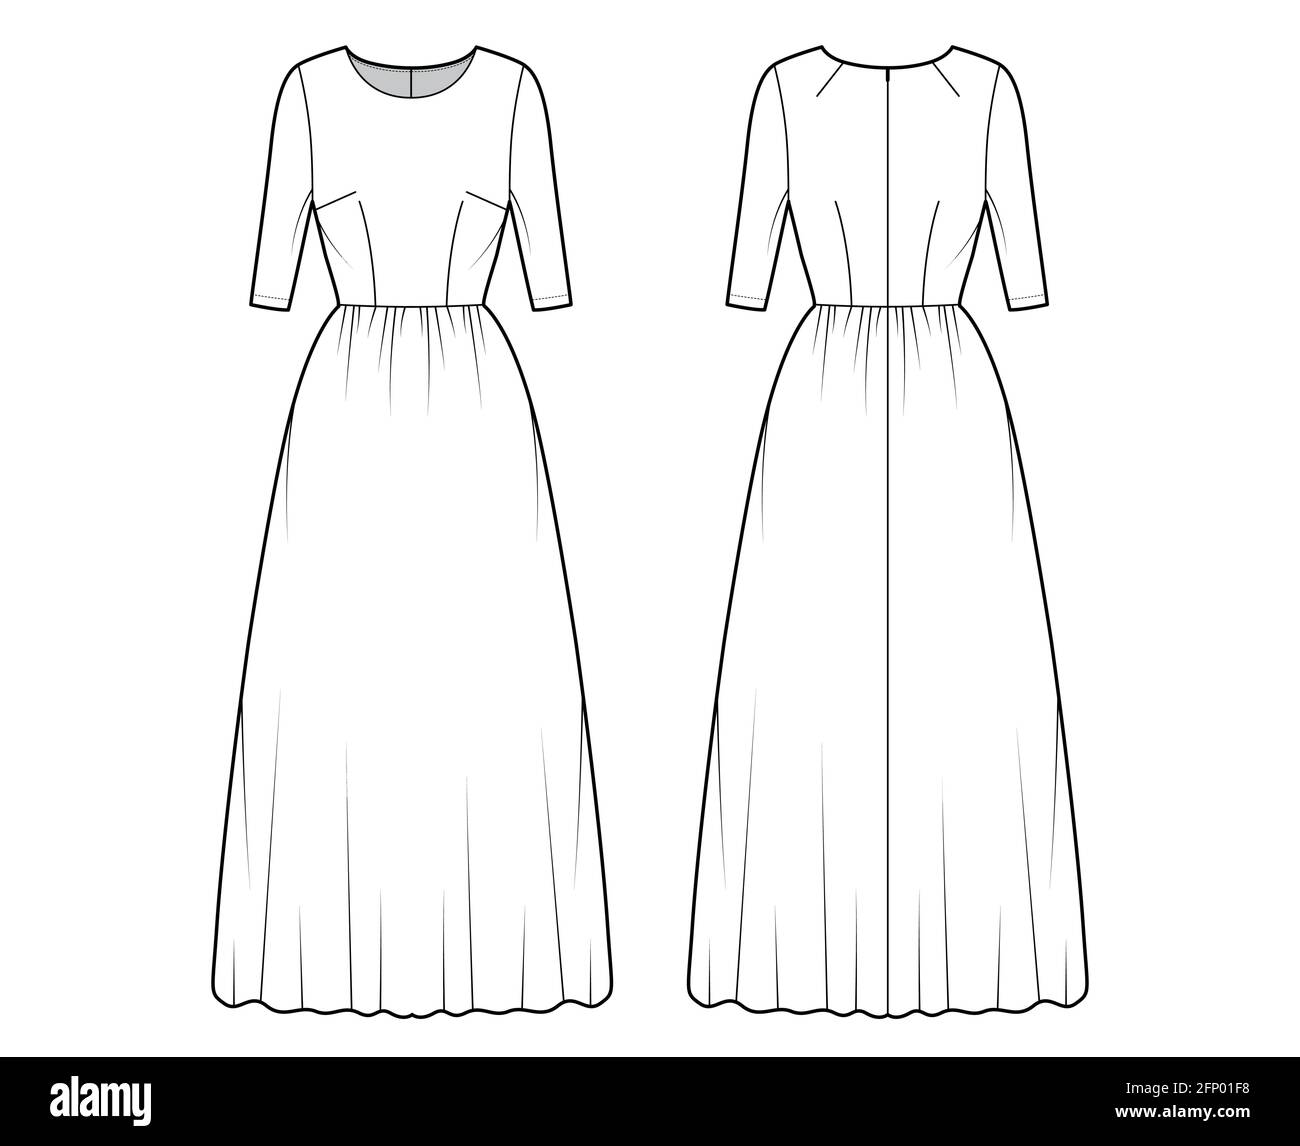 Dress, Fashion Flat Sketch Template, Stock, Vector Royalty Free SVG,  Cliparts, Vectors, and Stock Illustration. Image 141610489.